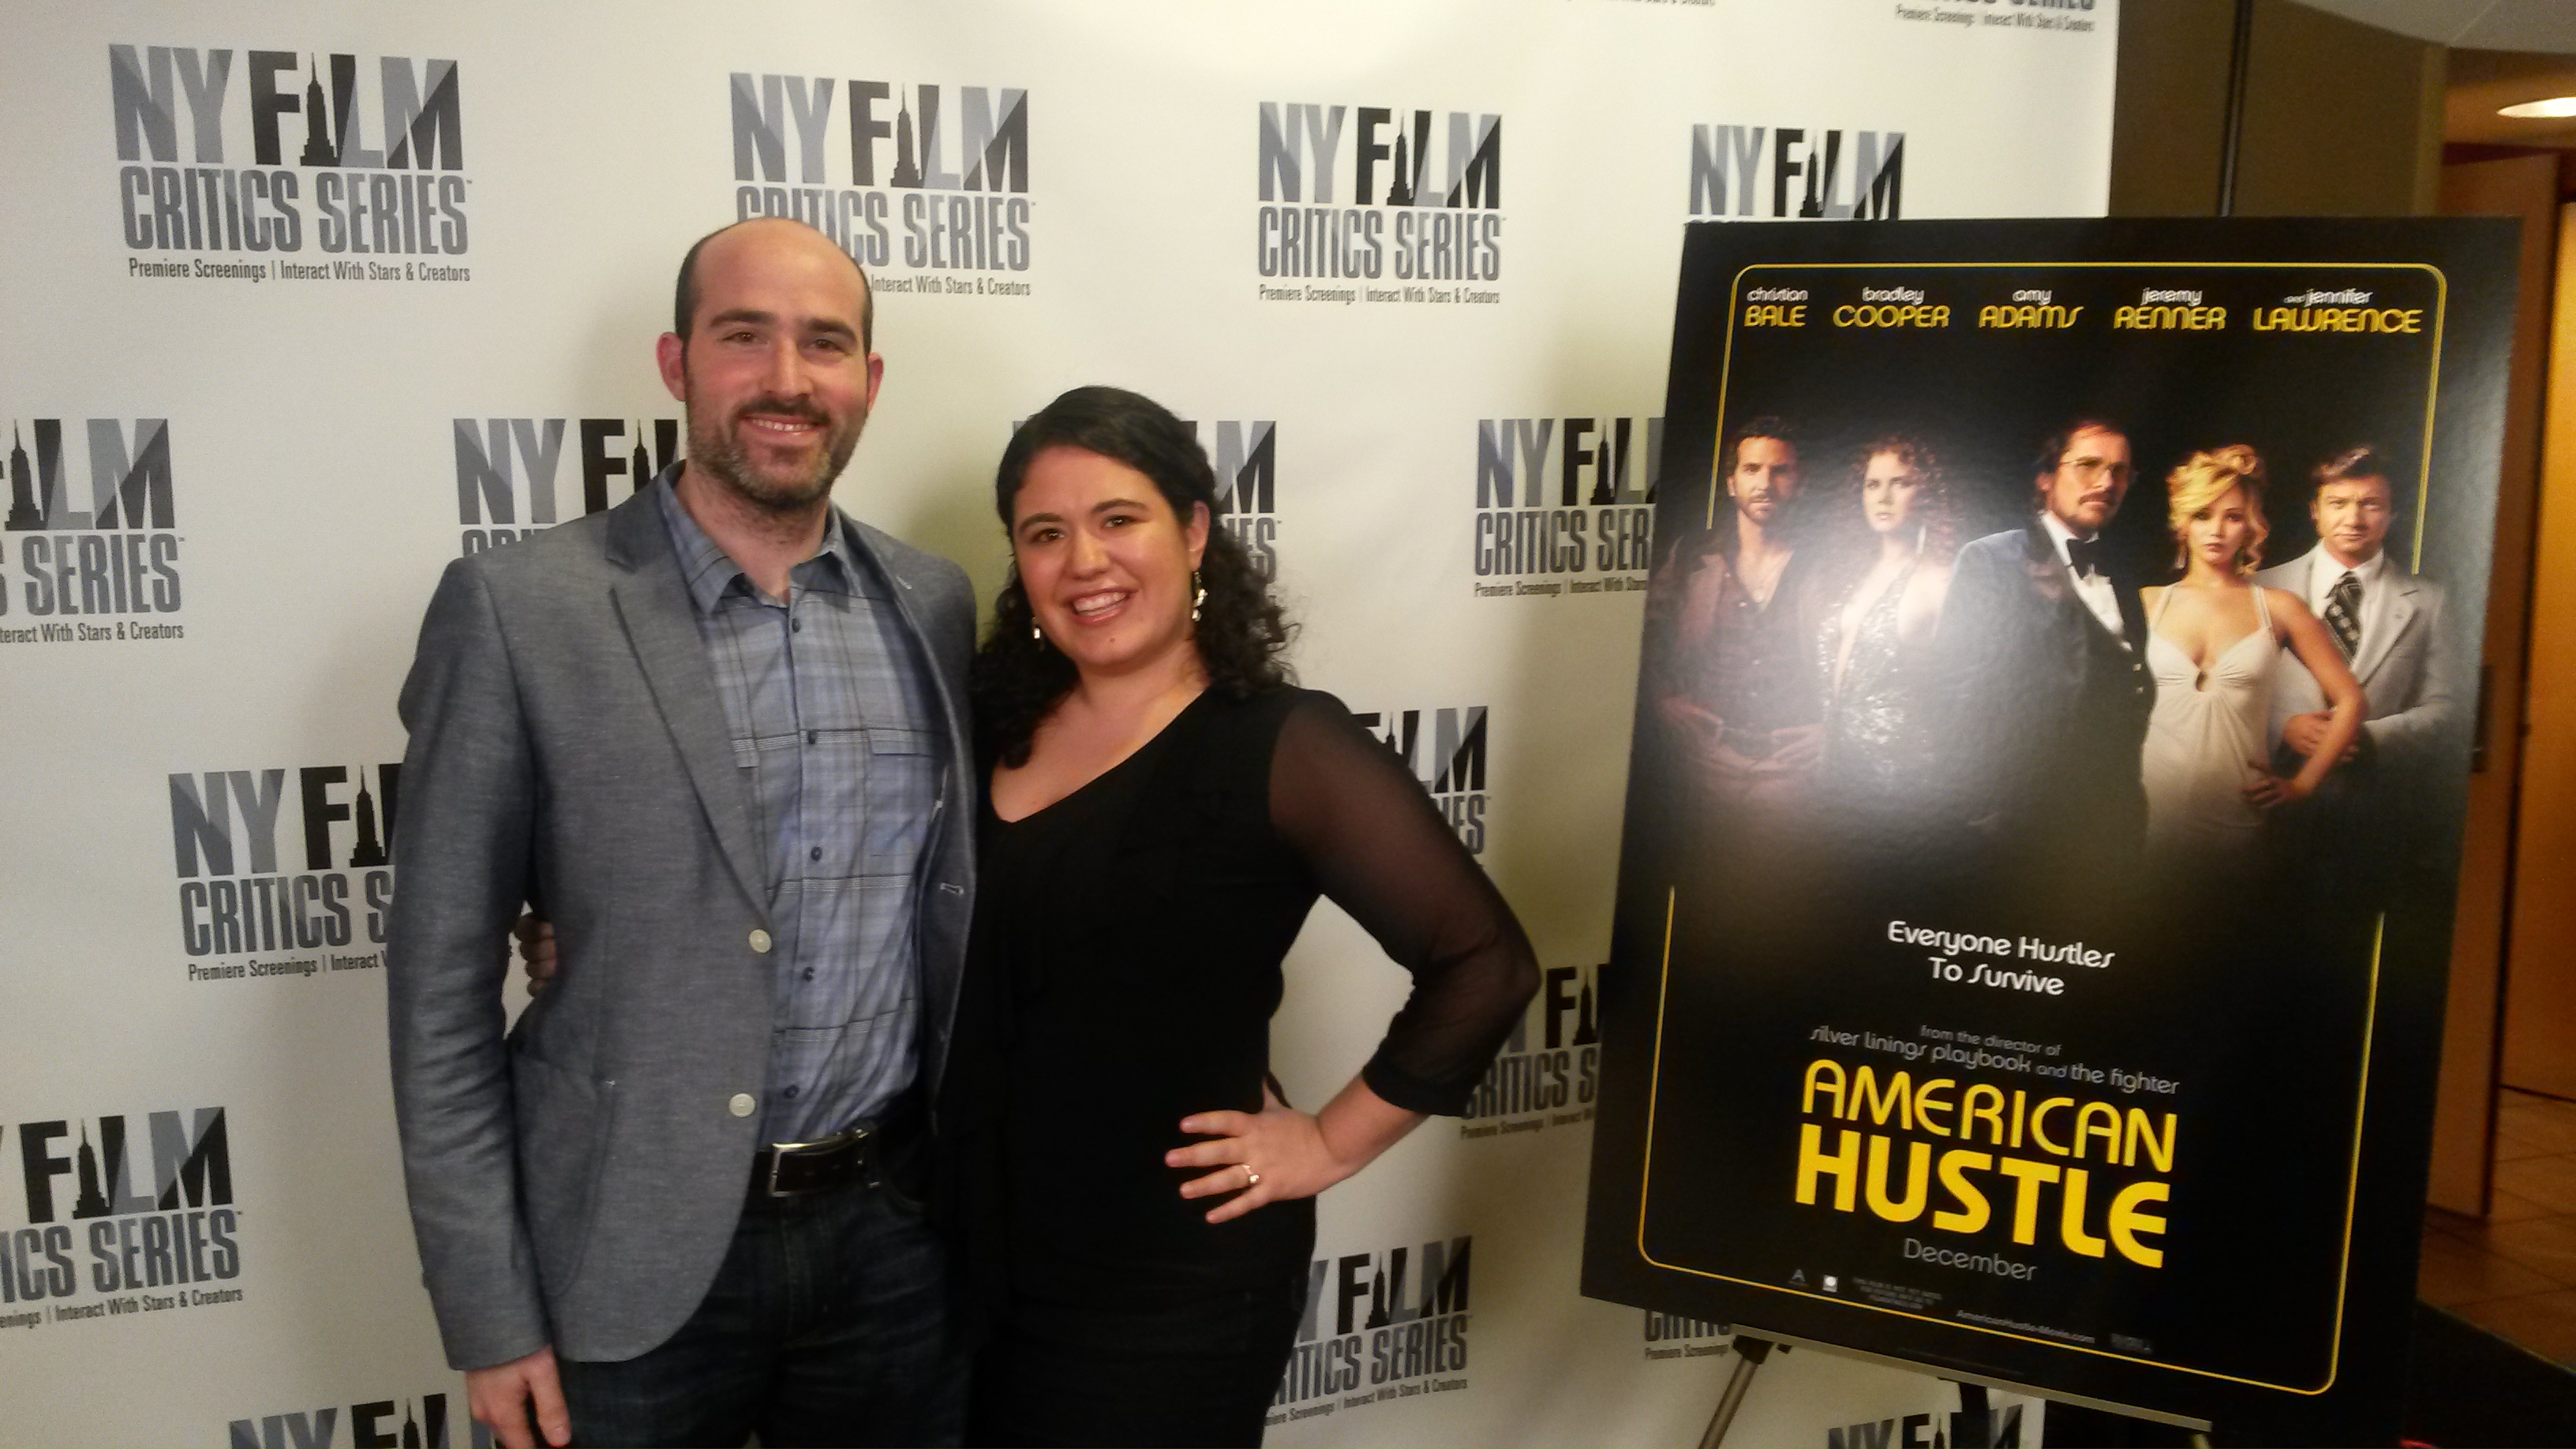 Becki Dennis with her husband Justin Buchman at the NY Film Critics Series Screening of 